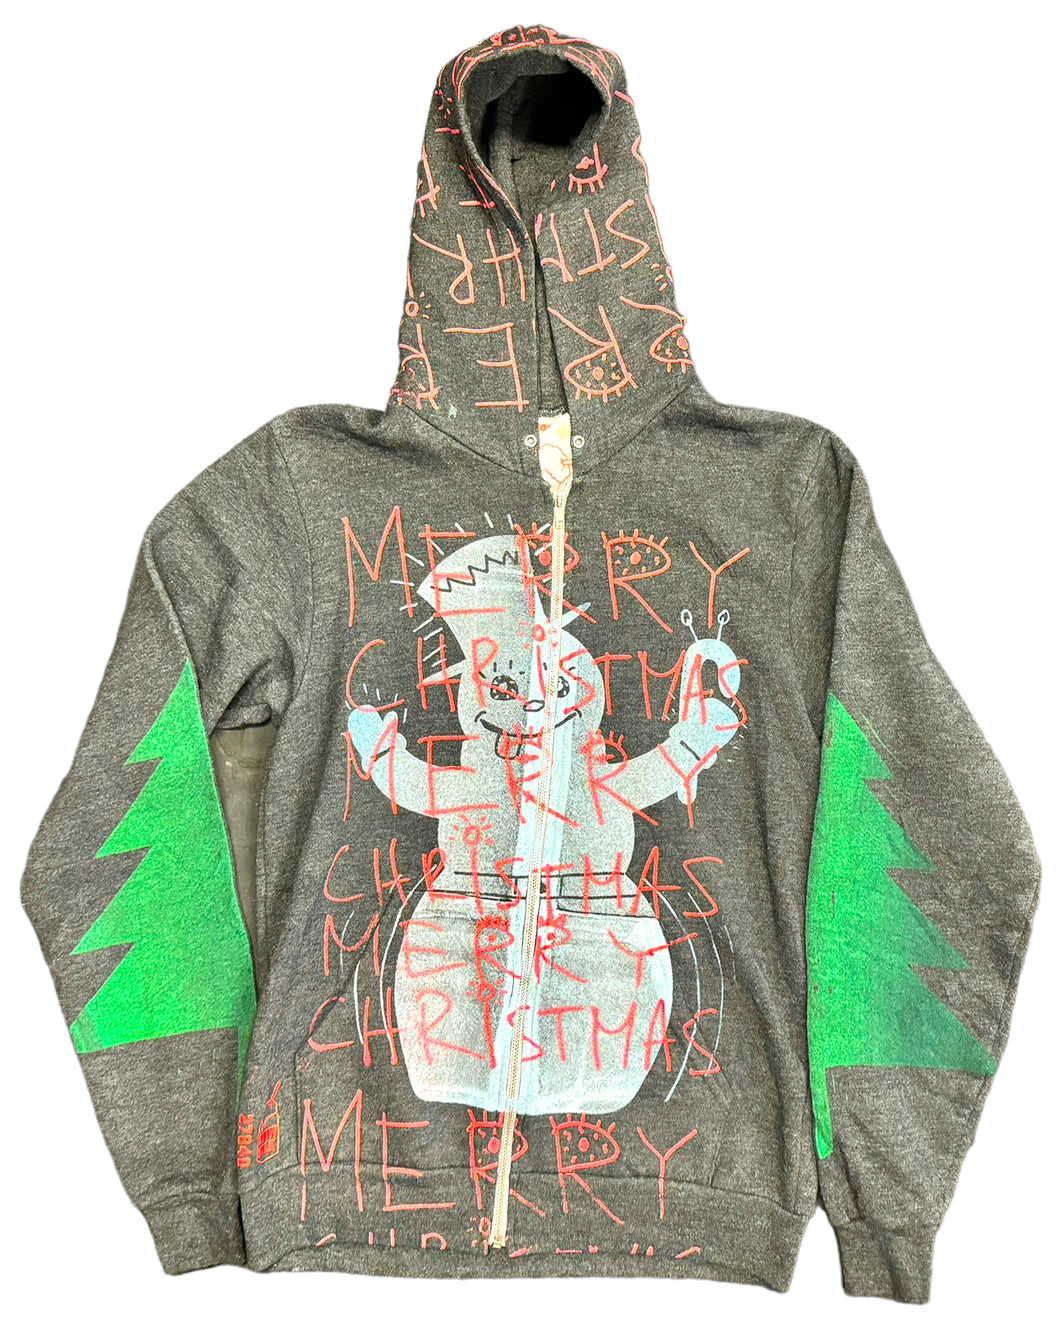 Merry Christmas Hoodie (Size M)